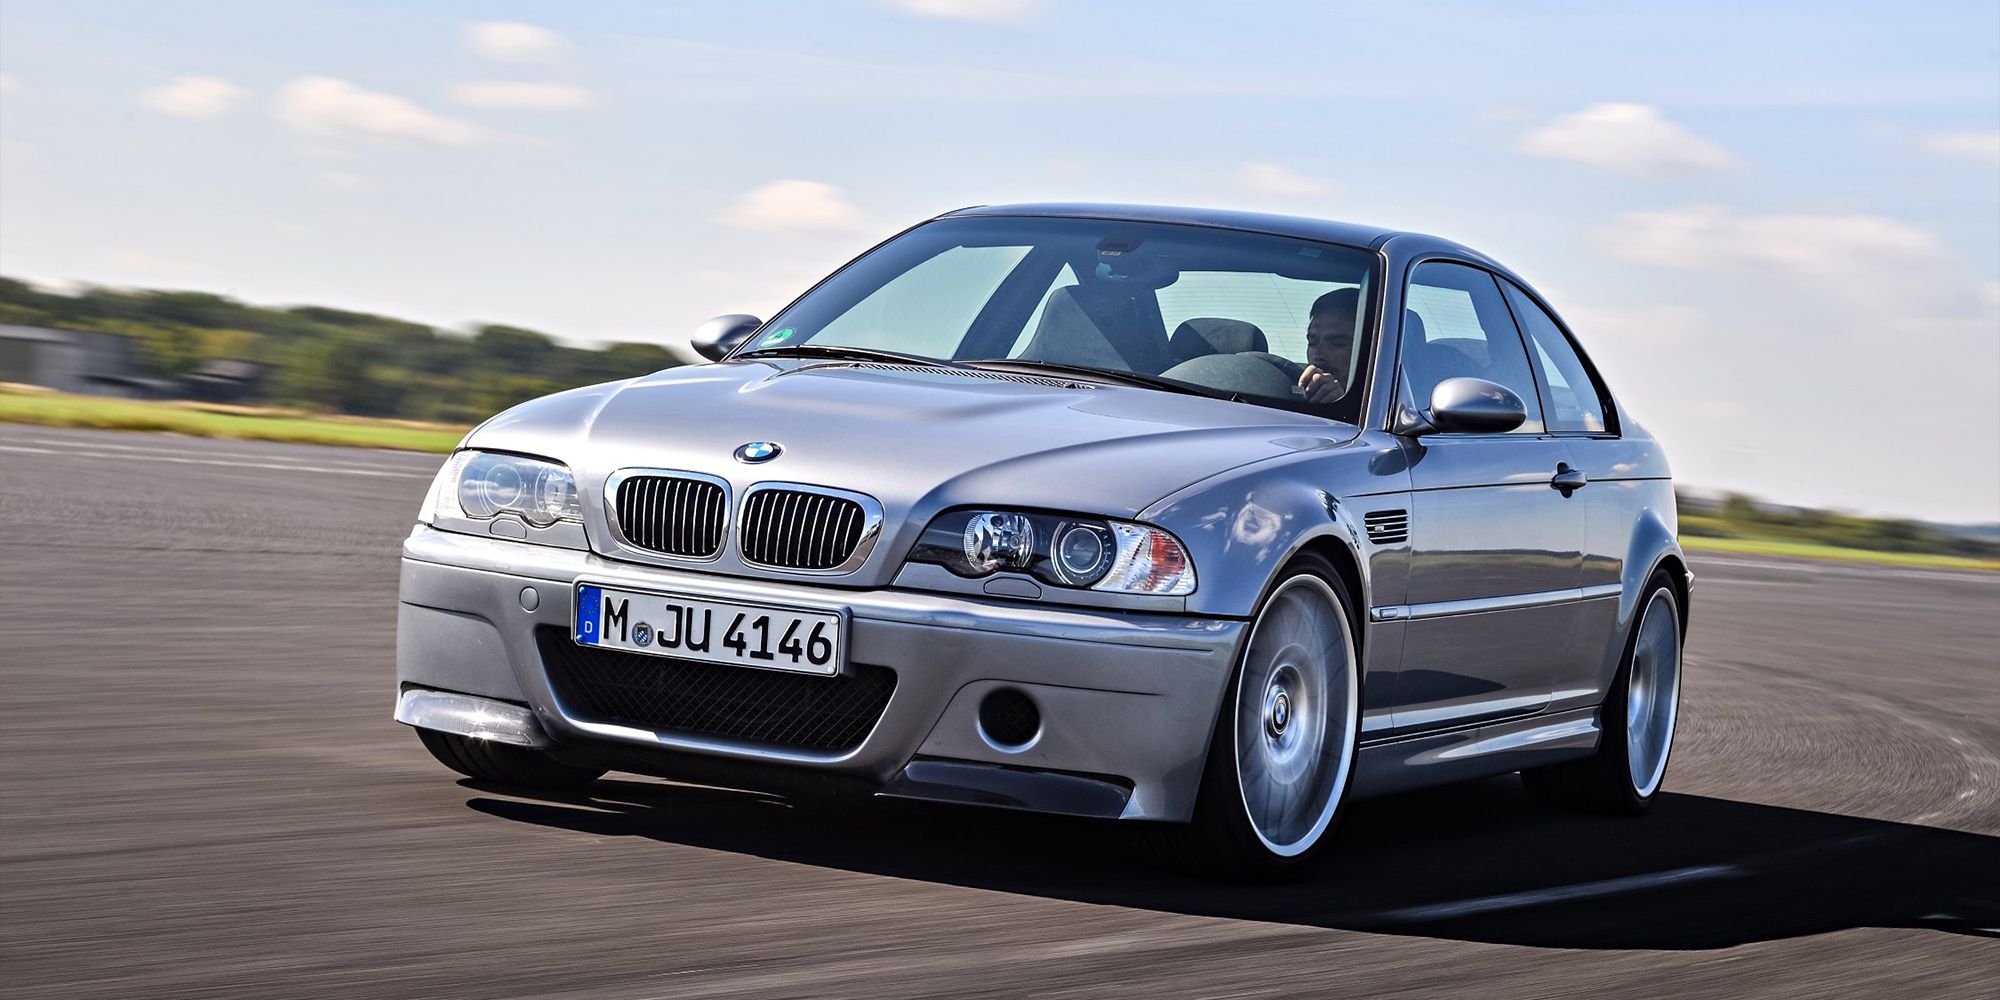 The front of the M3 CSL